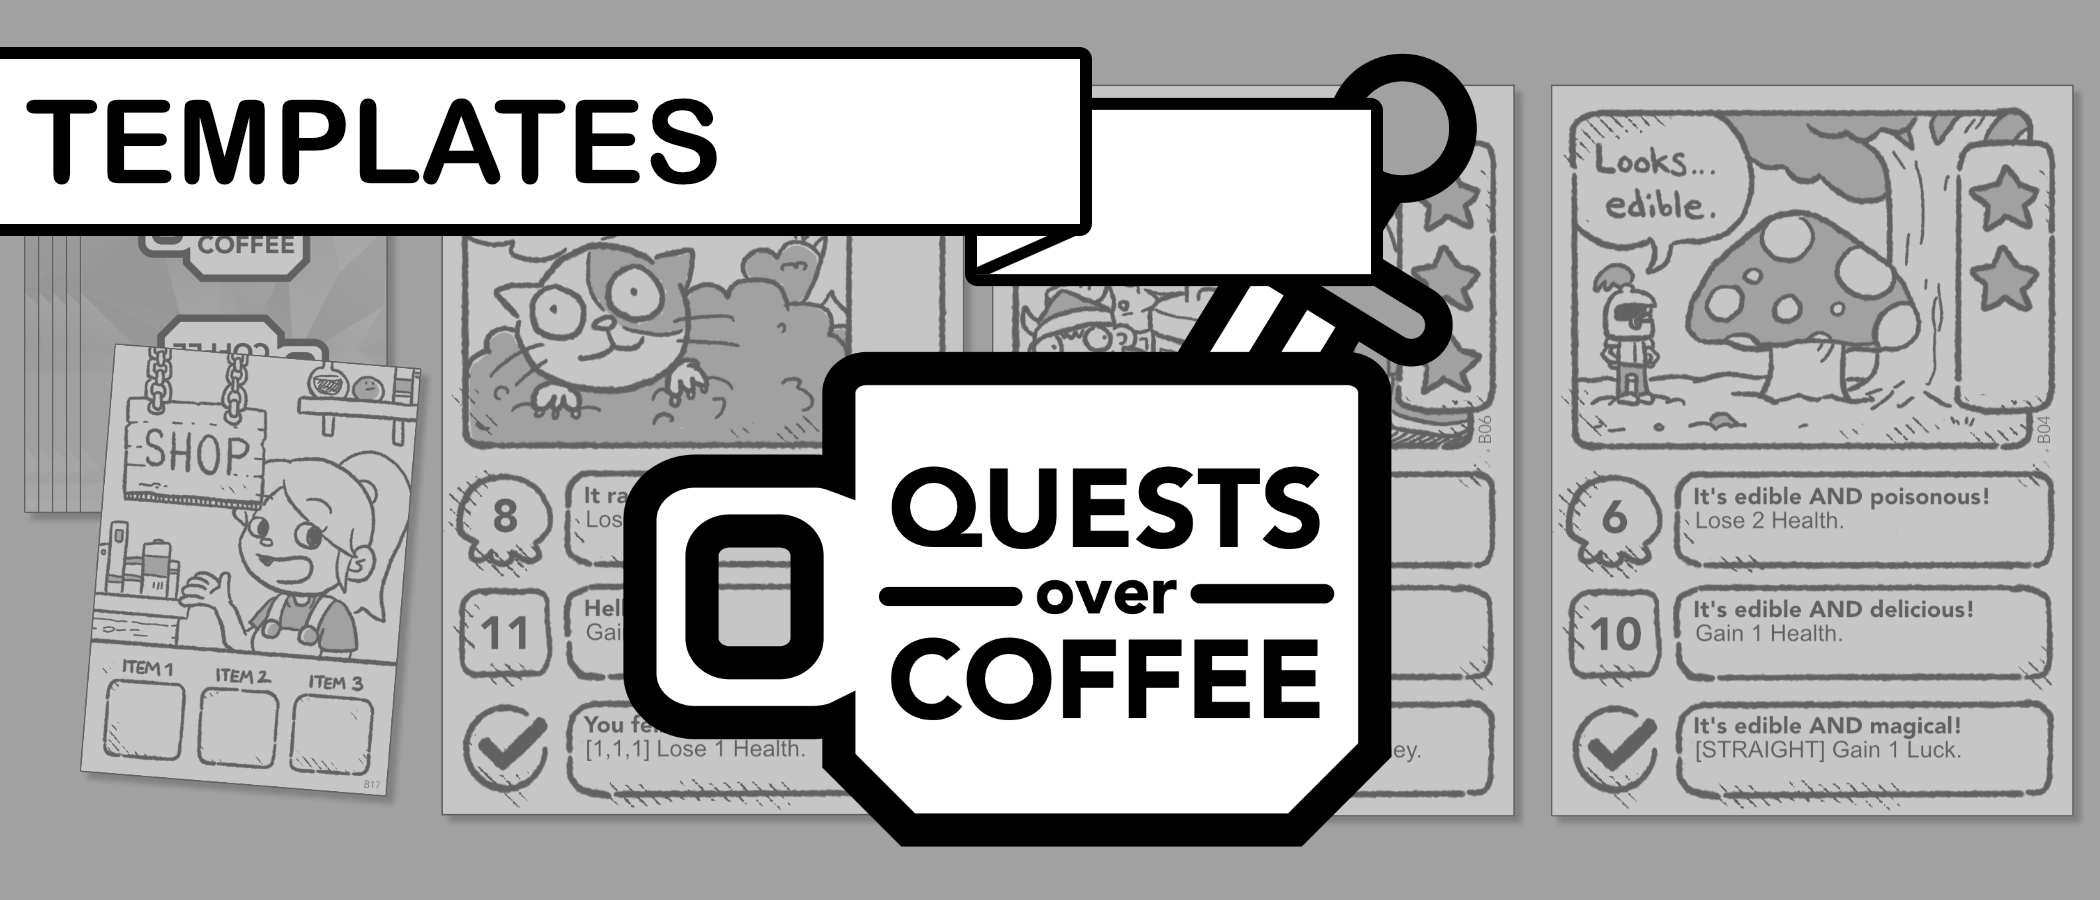 Quests Over Coffee Templates